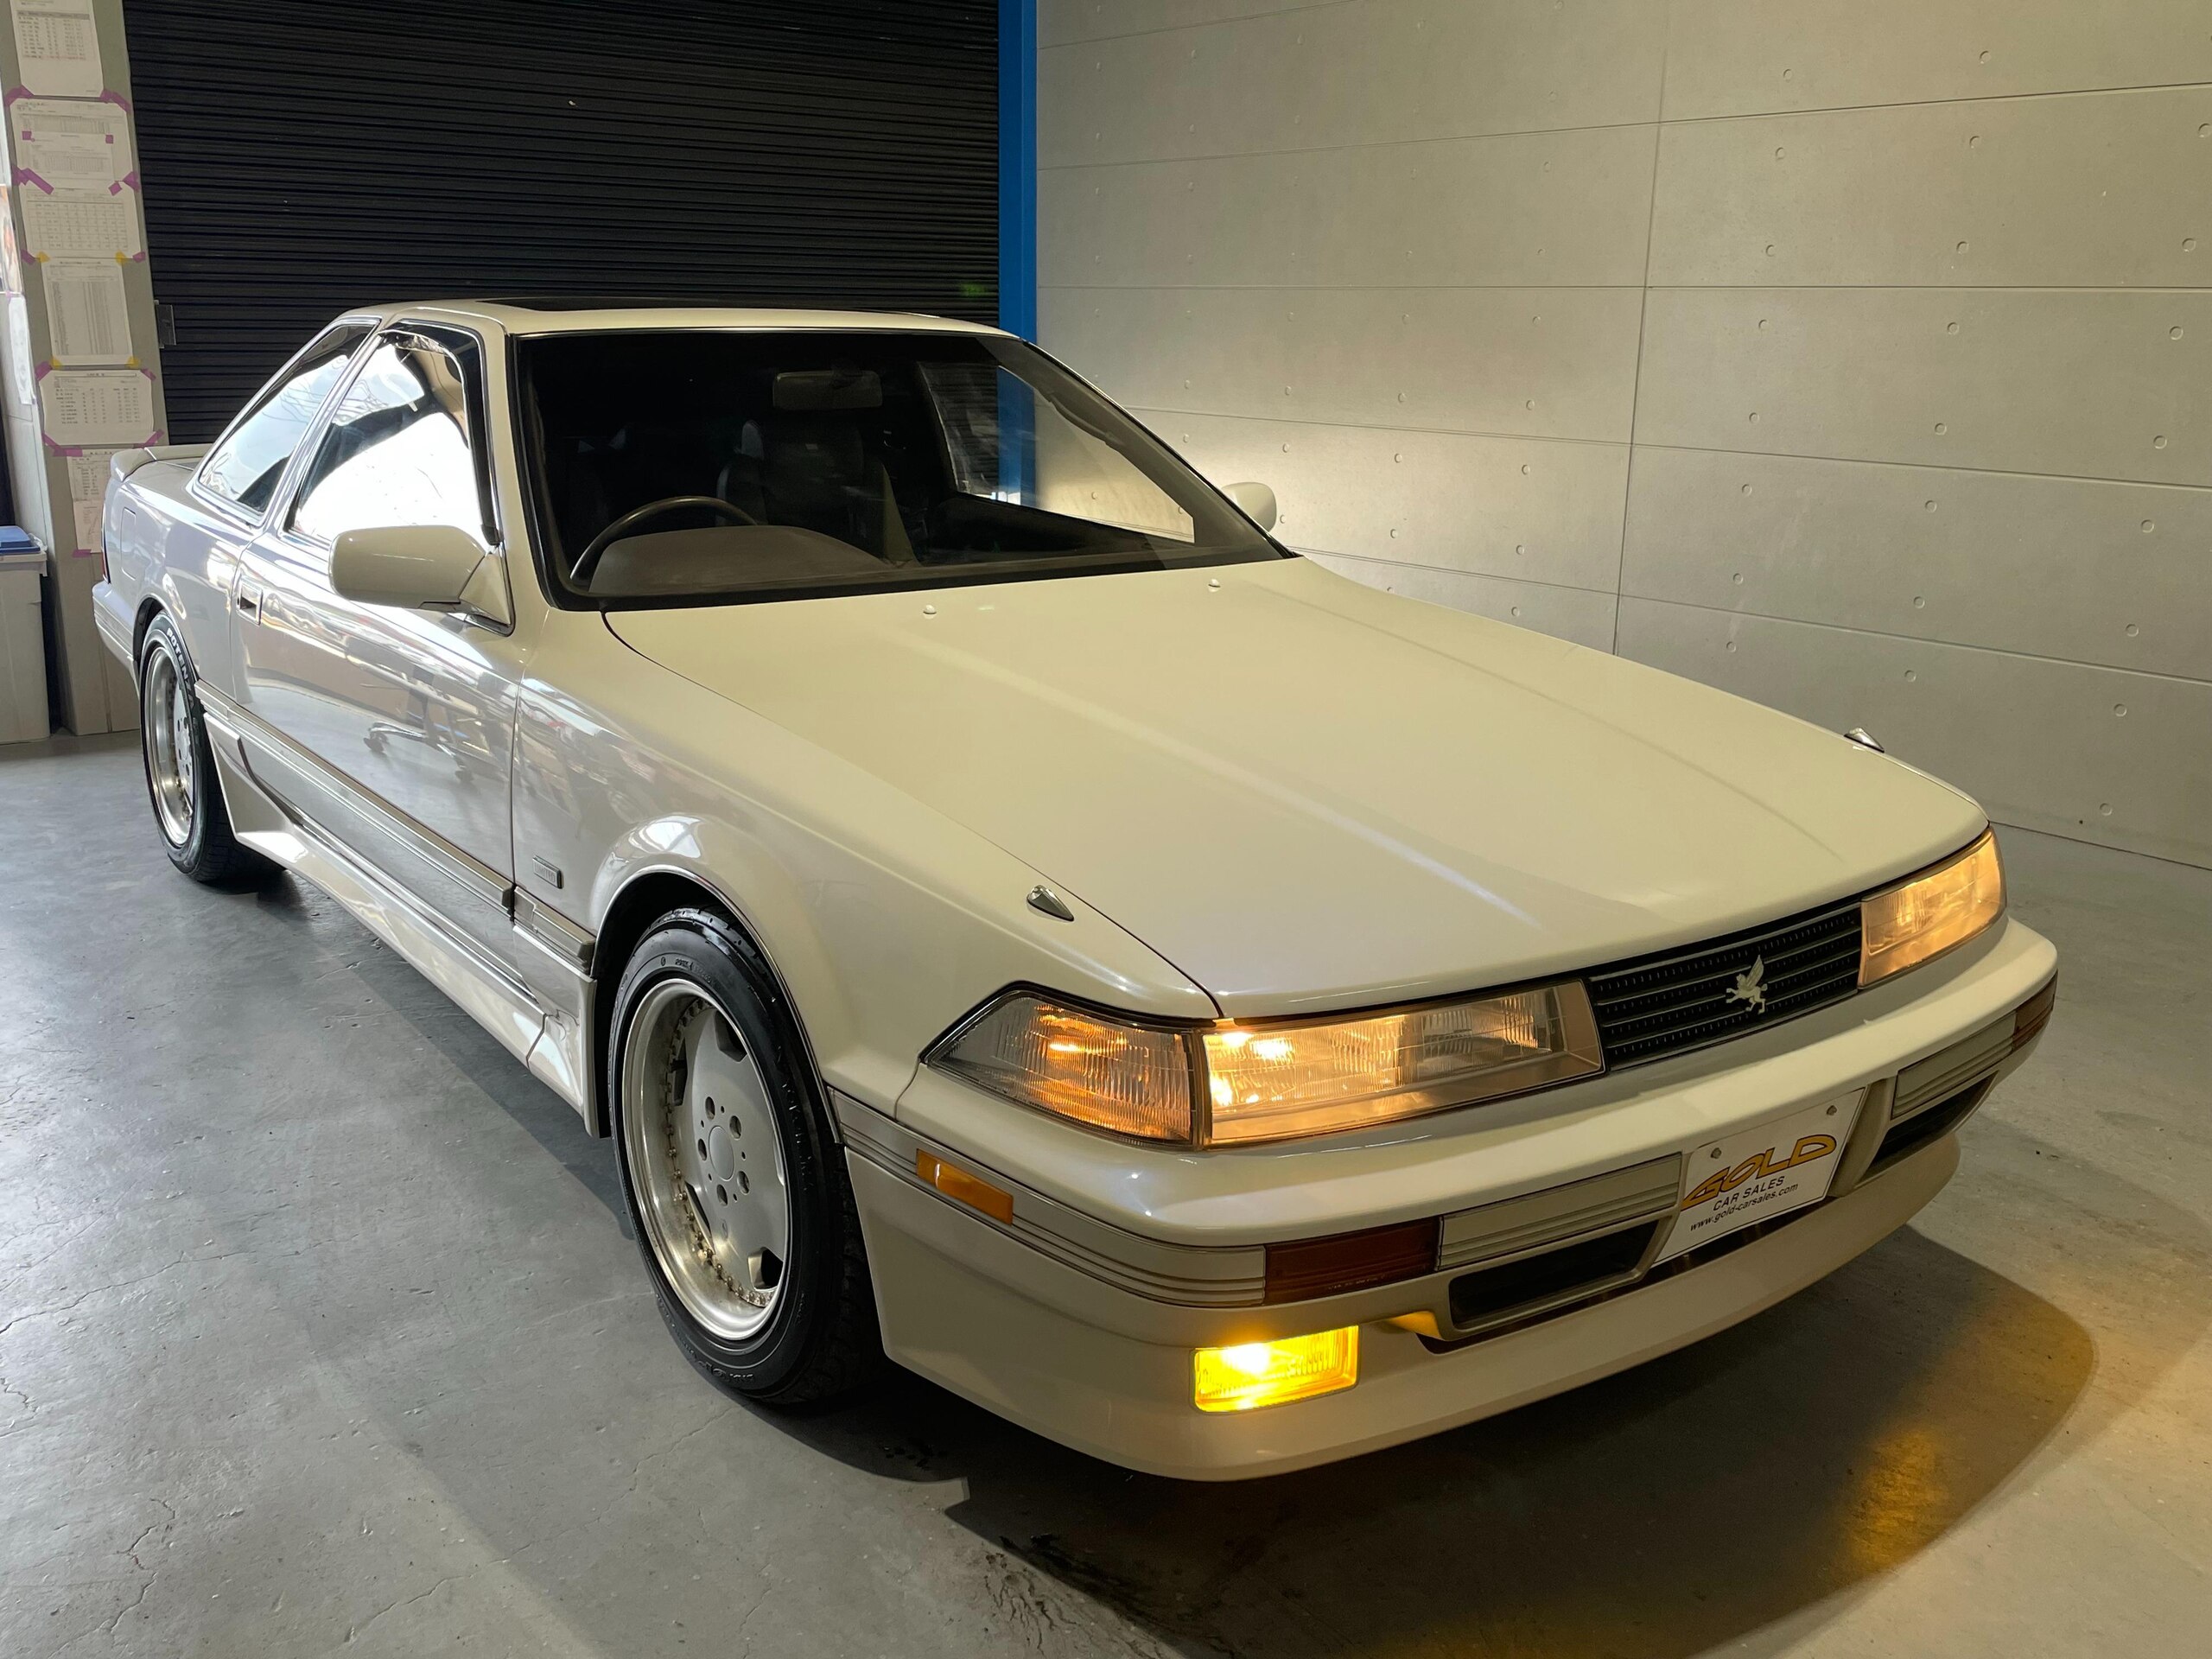 Used TOYOTA SOARER 1989 CFJ7560333 in good condition for sale